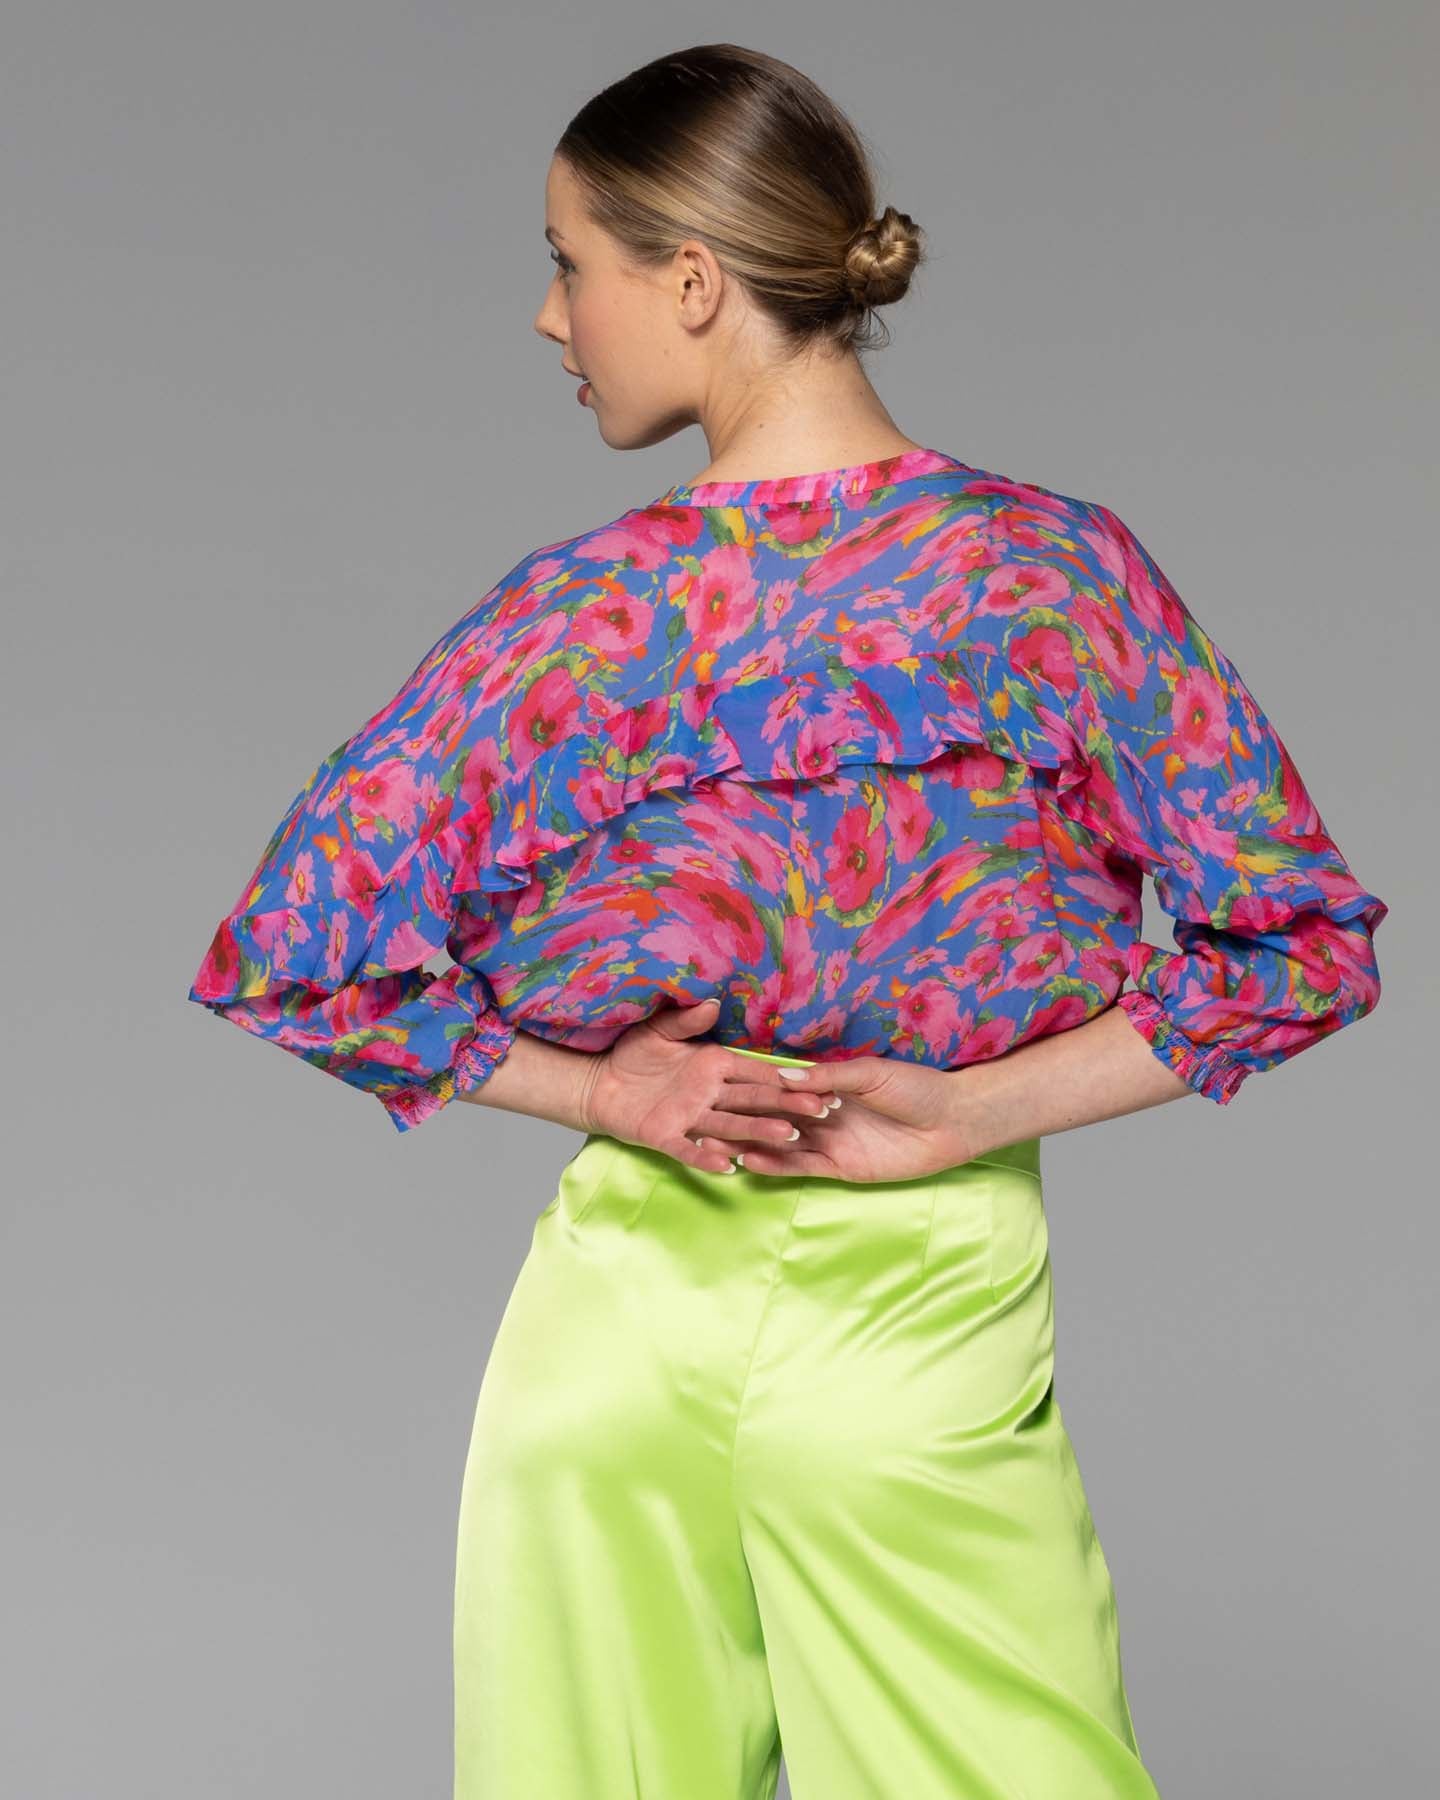 Fate+Becker Take Me Out Frill Sleeve Shirt - Warp Floral